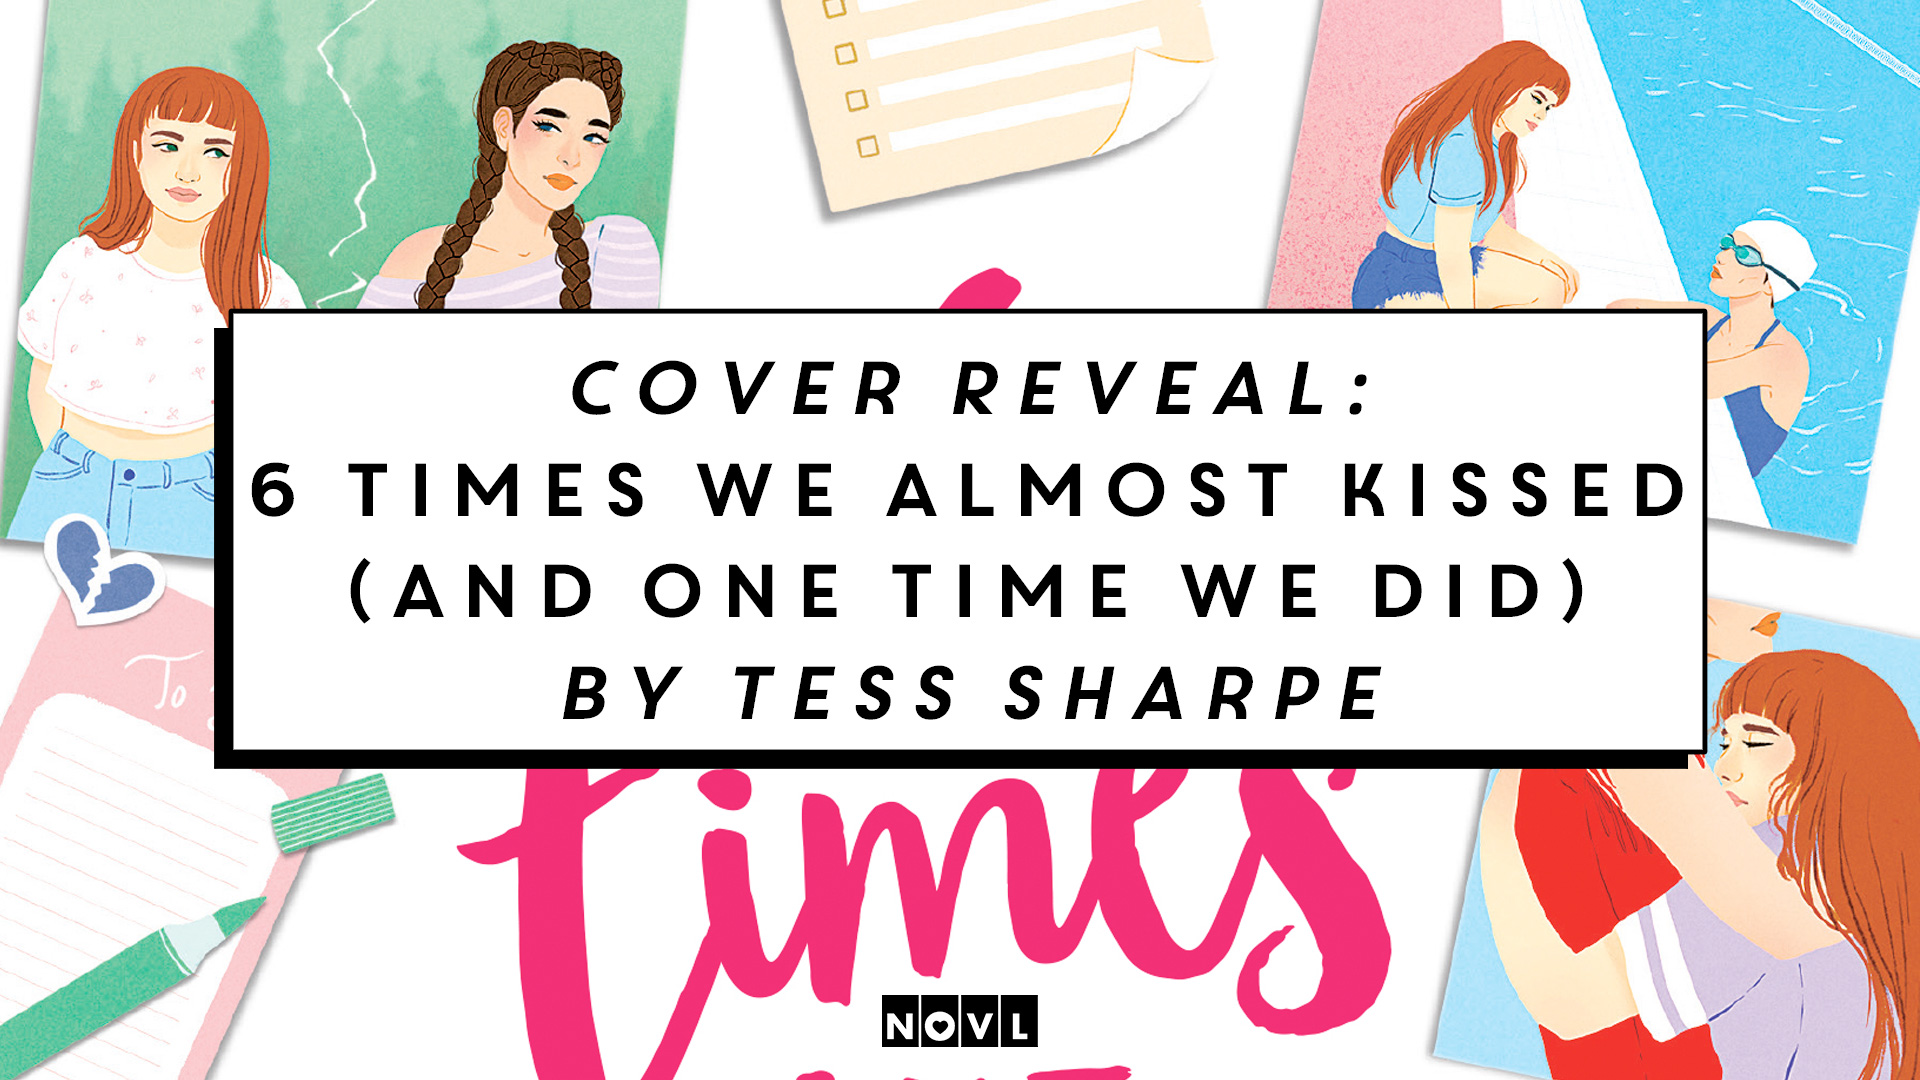 The NOVL Blog, Featured Image for Article: Cover Reveal: 6 Times We Almost Kissed (And One Time We Did) by Tess Sharpe